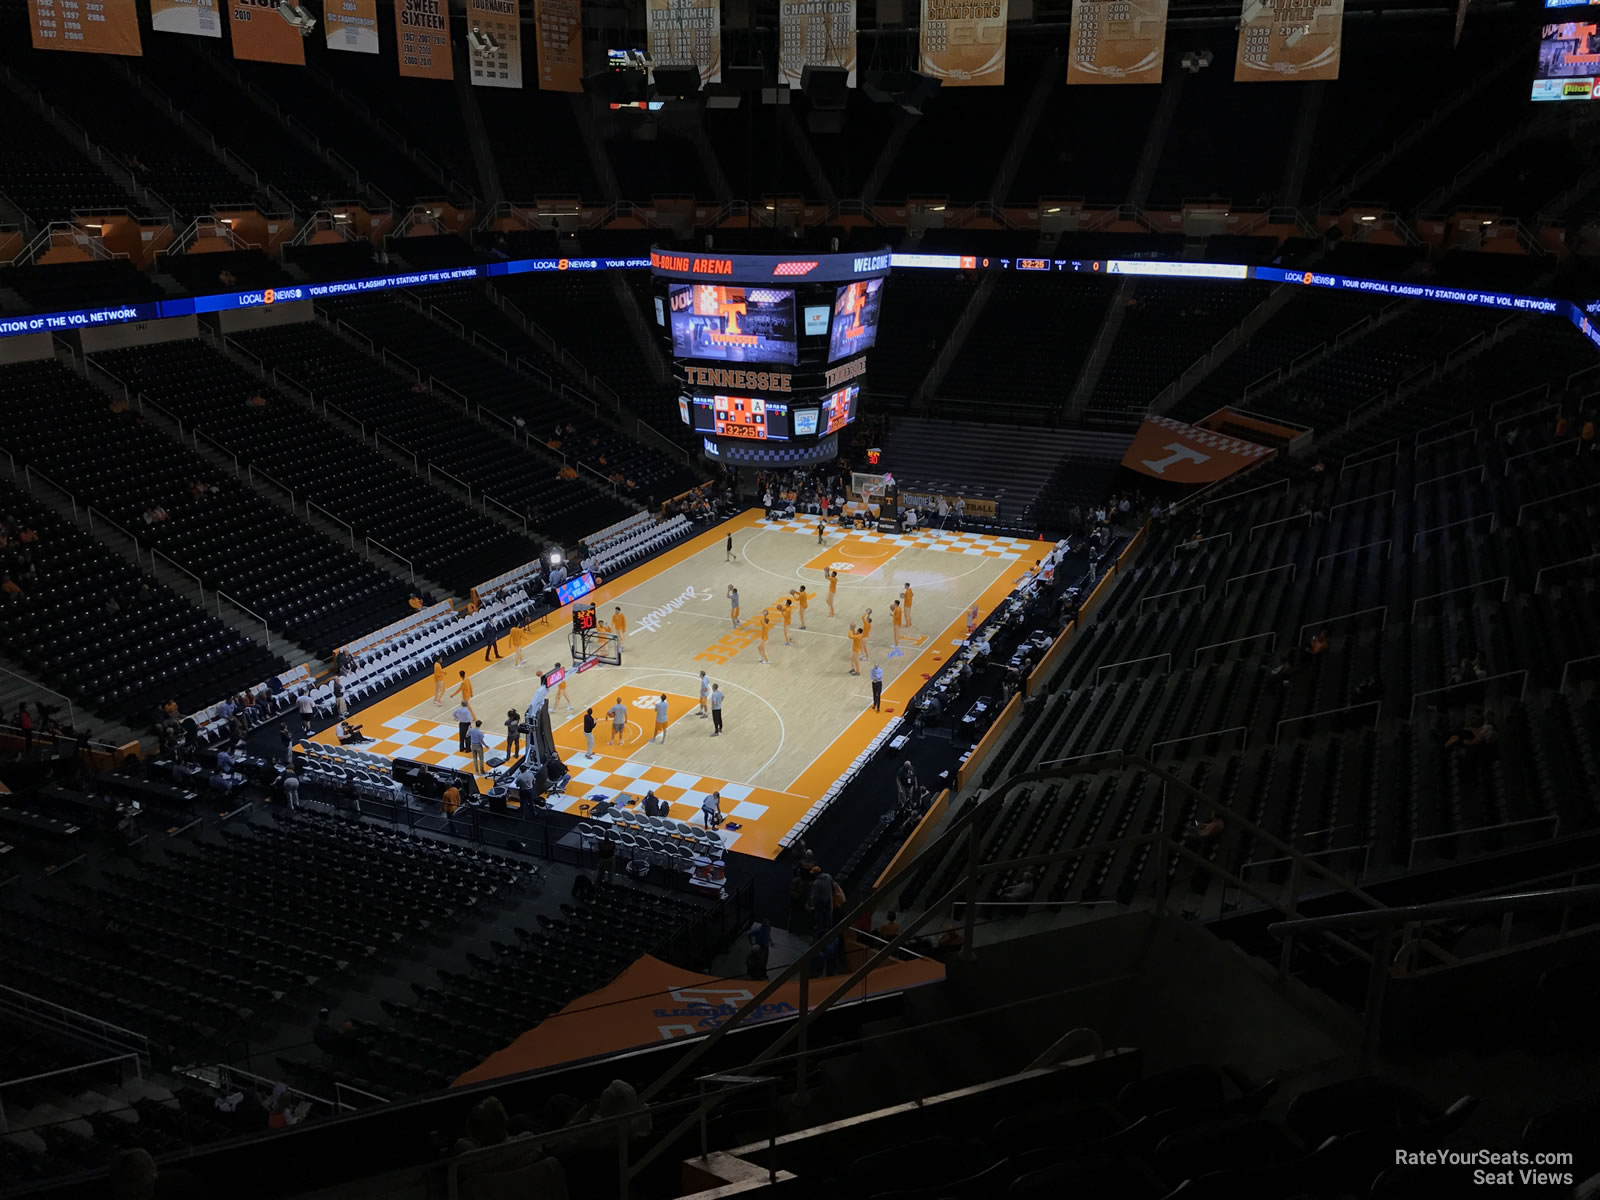 section 311, row 7 seat view  - thompson-boling arena